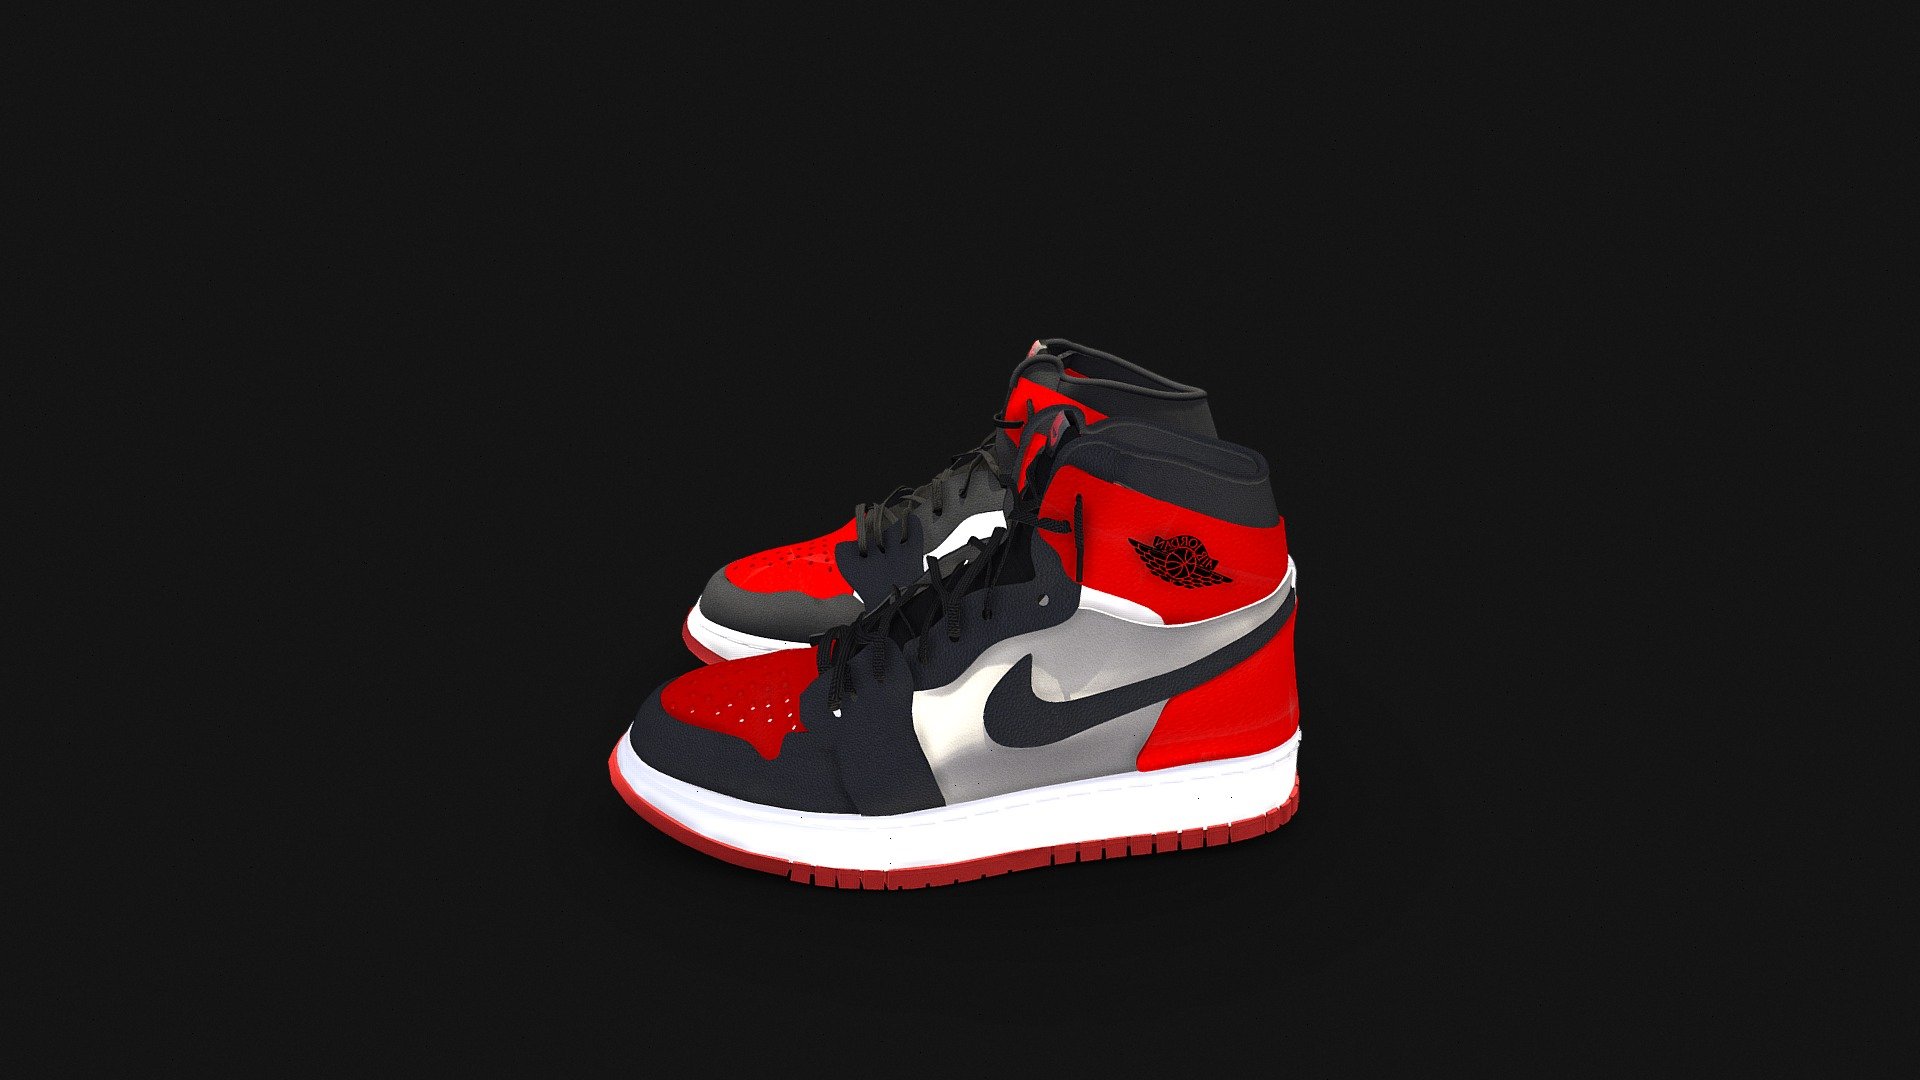 NIke Air Jordan 1 High 3d Model Made in blender by me.
Textures are also made by me.
Free to use if you credit me 3d model